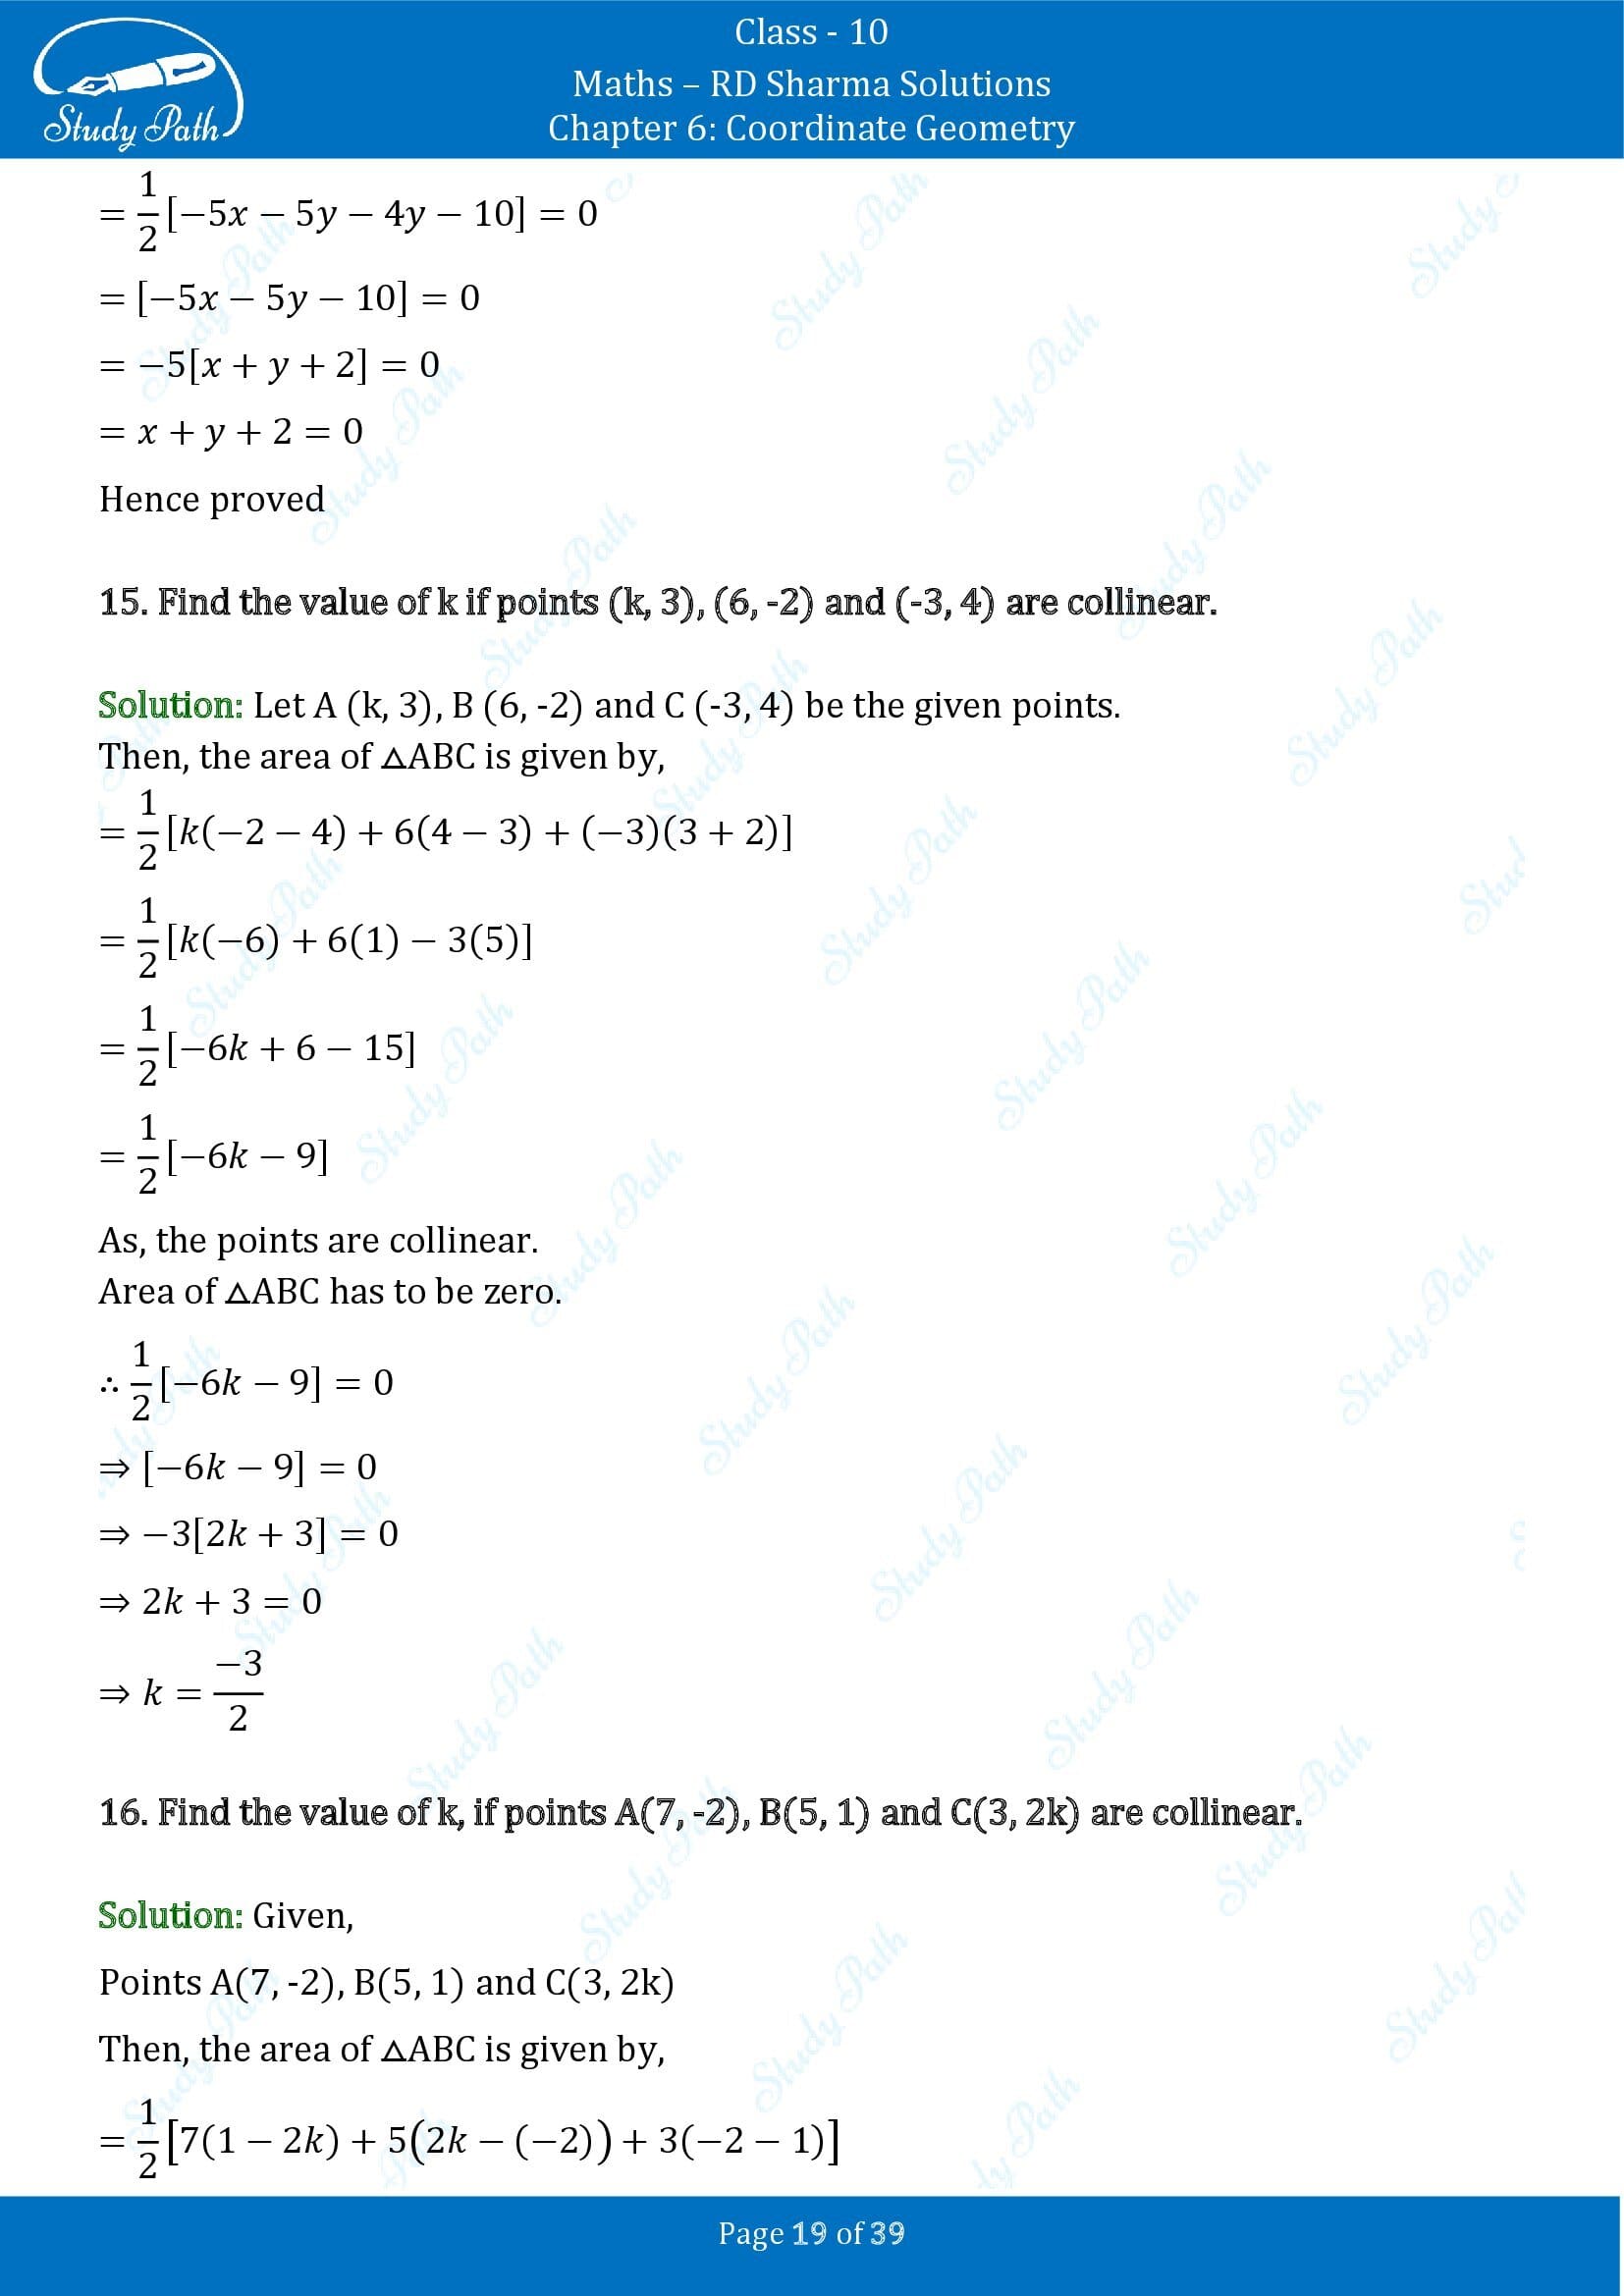 RD Sharma Solutions Class 10 Chapter 6 Coordinate Geometry Exercise 6.5 0019